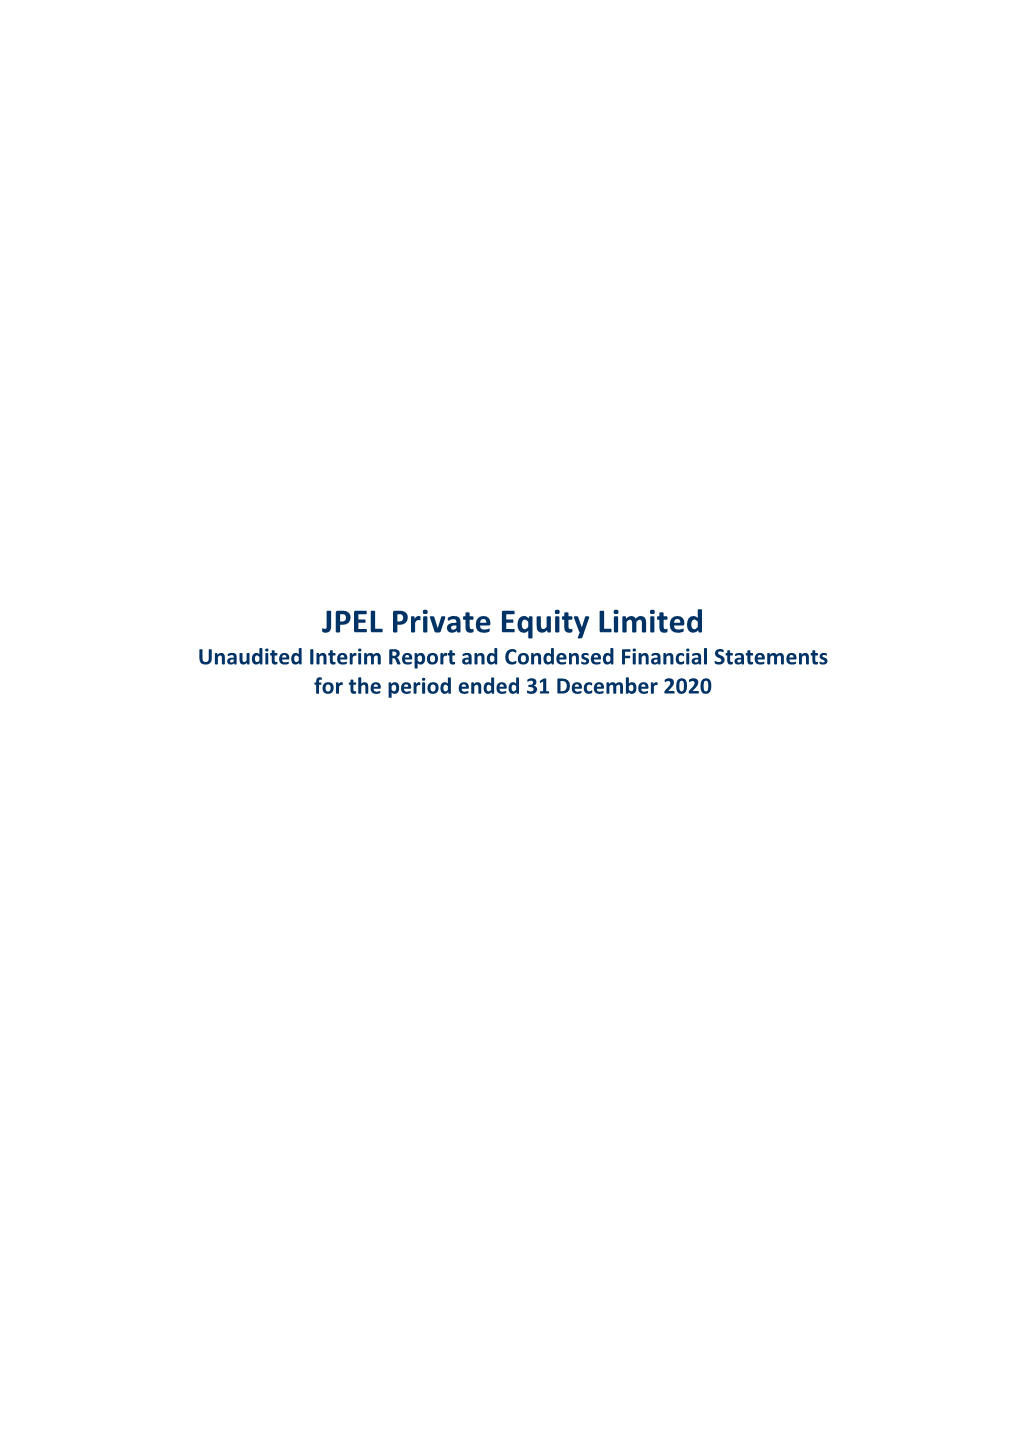 JPEL Private Equity Limited Unaudited Interim Report and Condensed Financial Statements for the Period Ended 31 December 2020